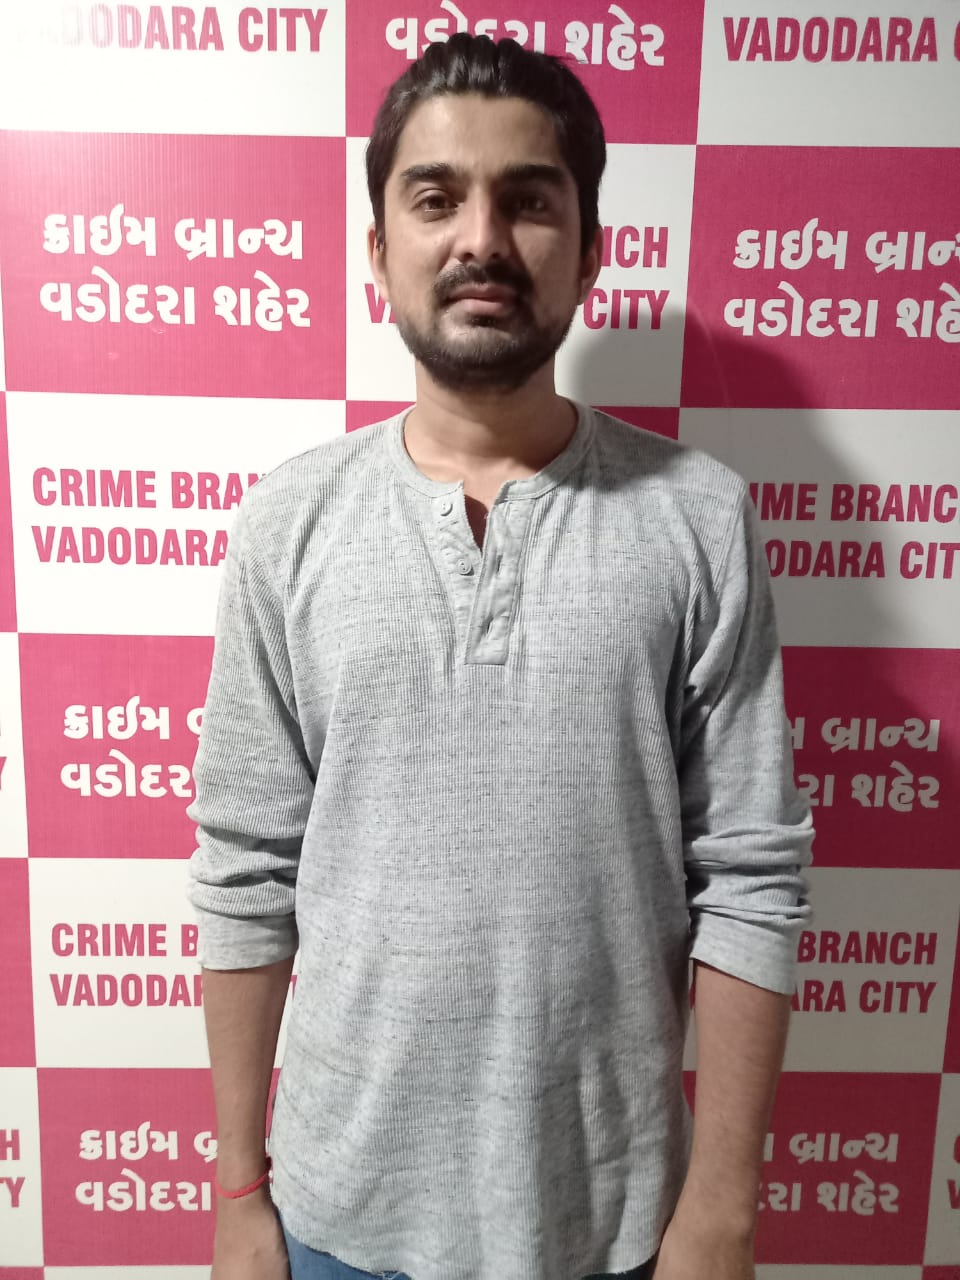 Vadodara crime branch arrest one for altering the CMs speech and made the video viral on social media